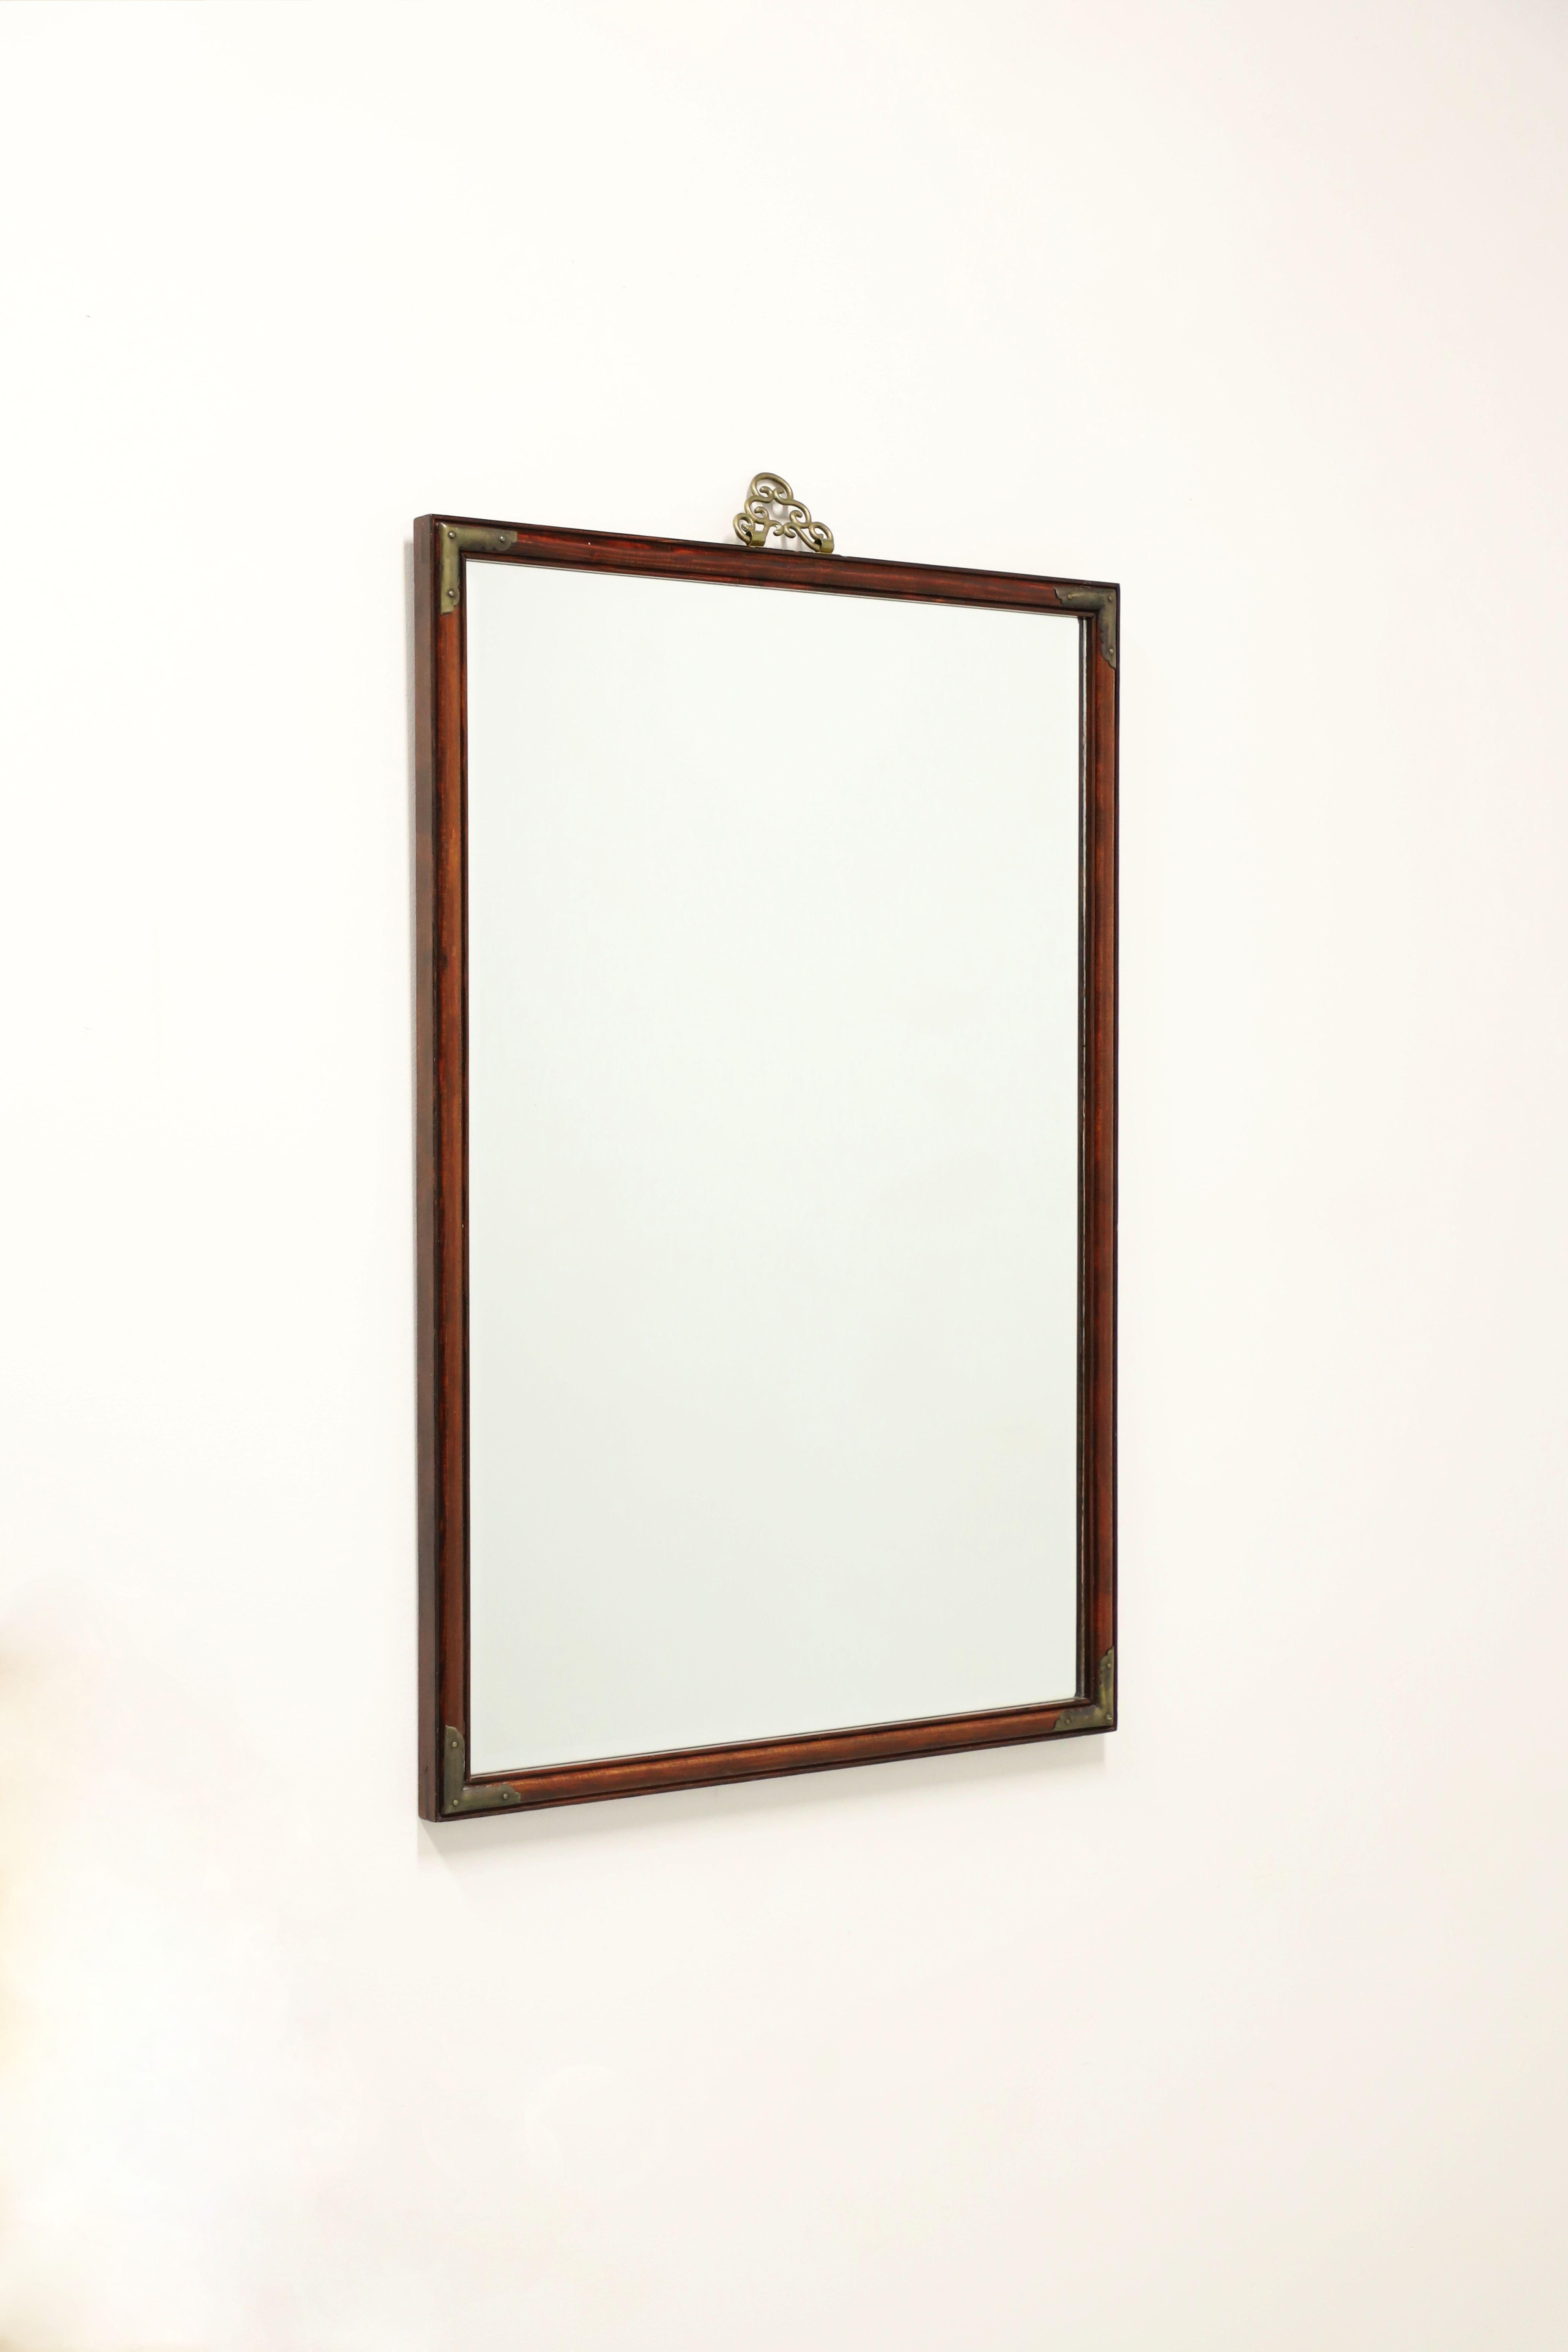 A Japanese Tansu Campaign style wall mirror, unbranded, similar quality to Henredon. Beveled mirror glass in a rectangular mahogany frame with decorative Japanese Tansu brass accents and hanger. Likely made in North Carolina, USA, in the mid 20th